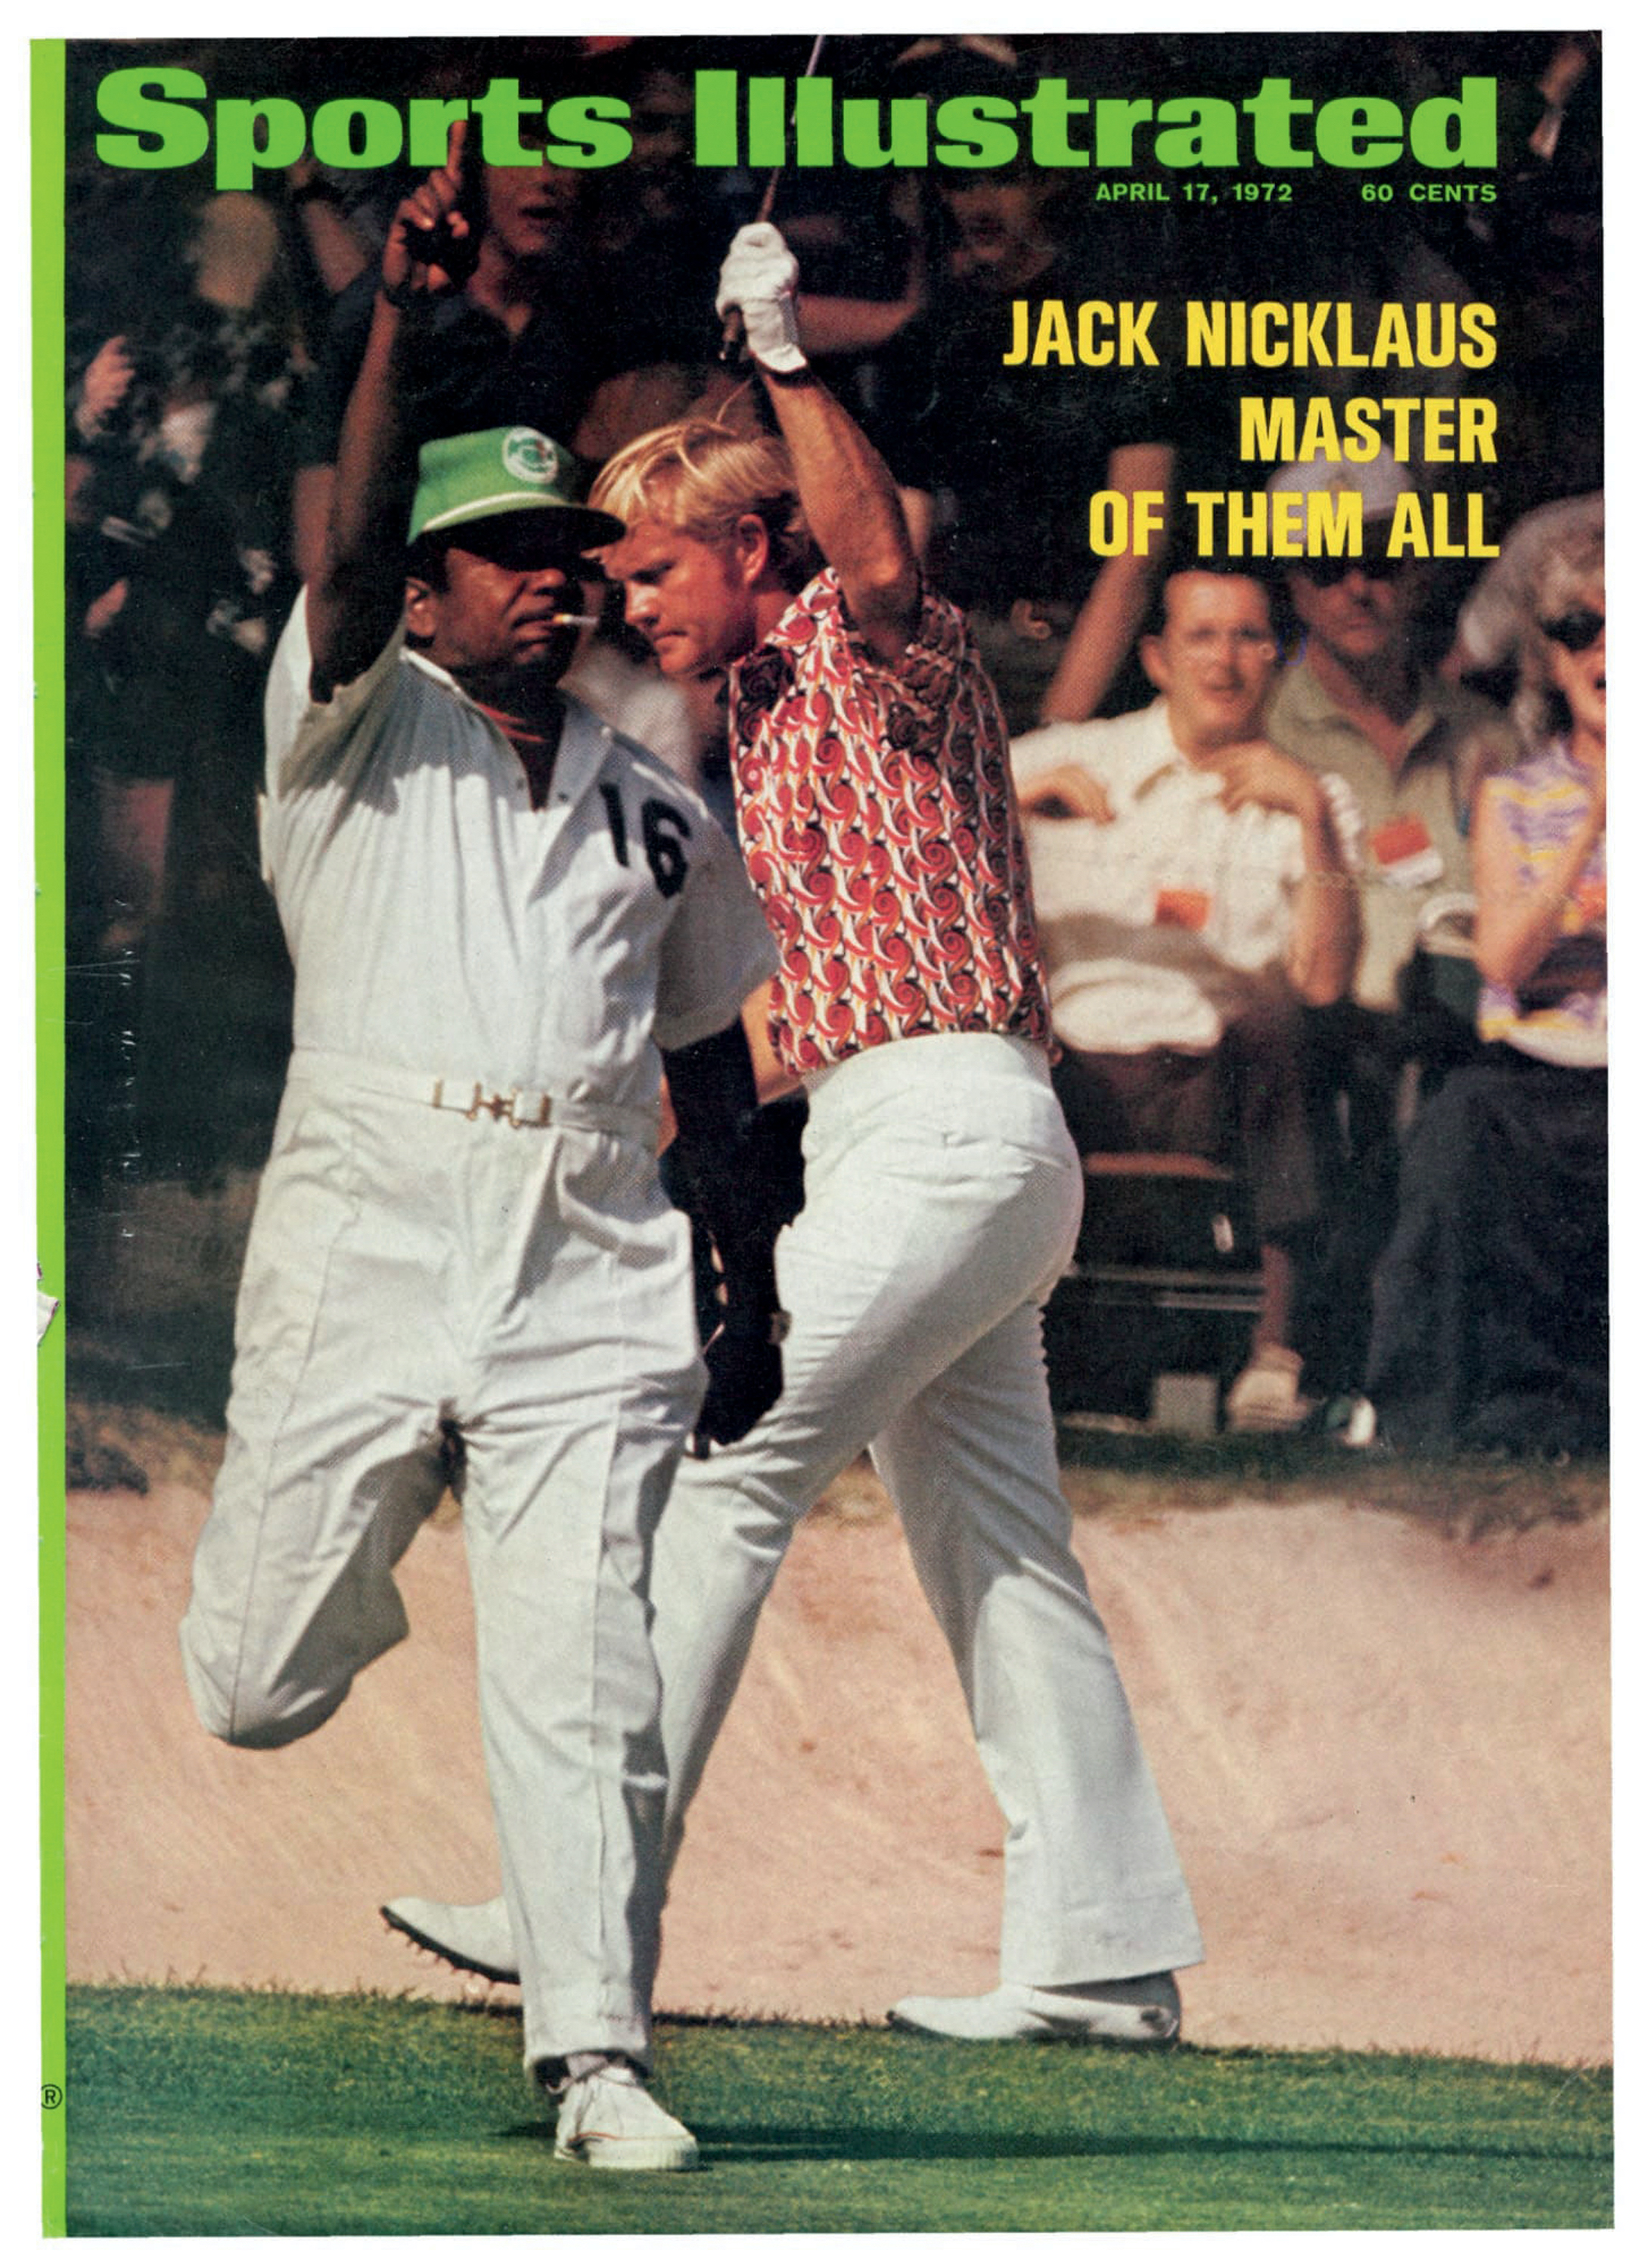 Caddie Willie Peterson and Jack Nicklaus celebrate their Masters win on the 1972 cover of Sports Illustrated.